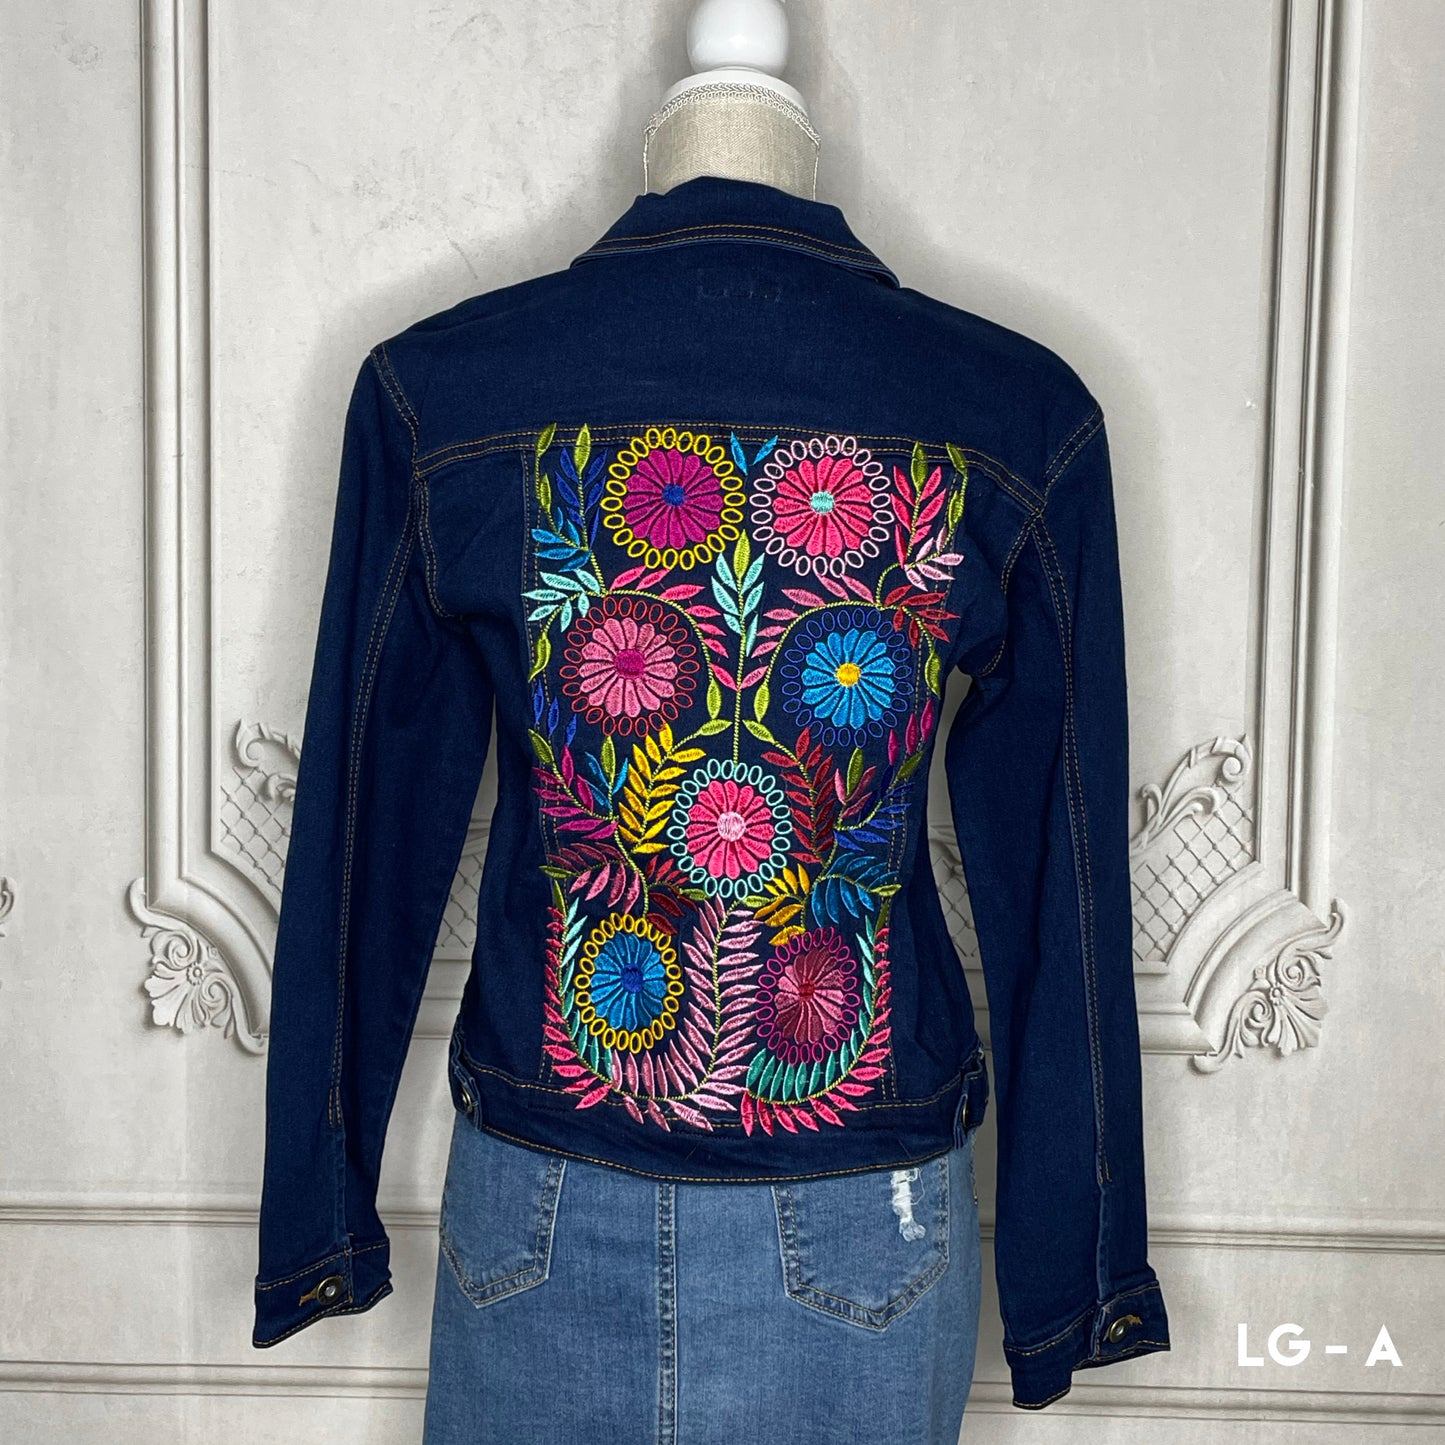 Mexican Embroidered Denim Jacket - Rococo